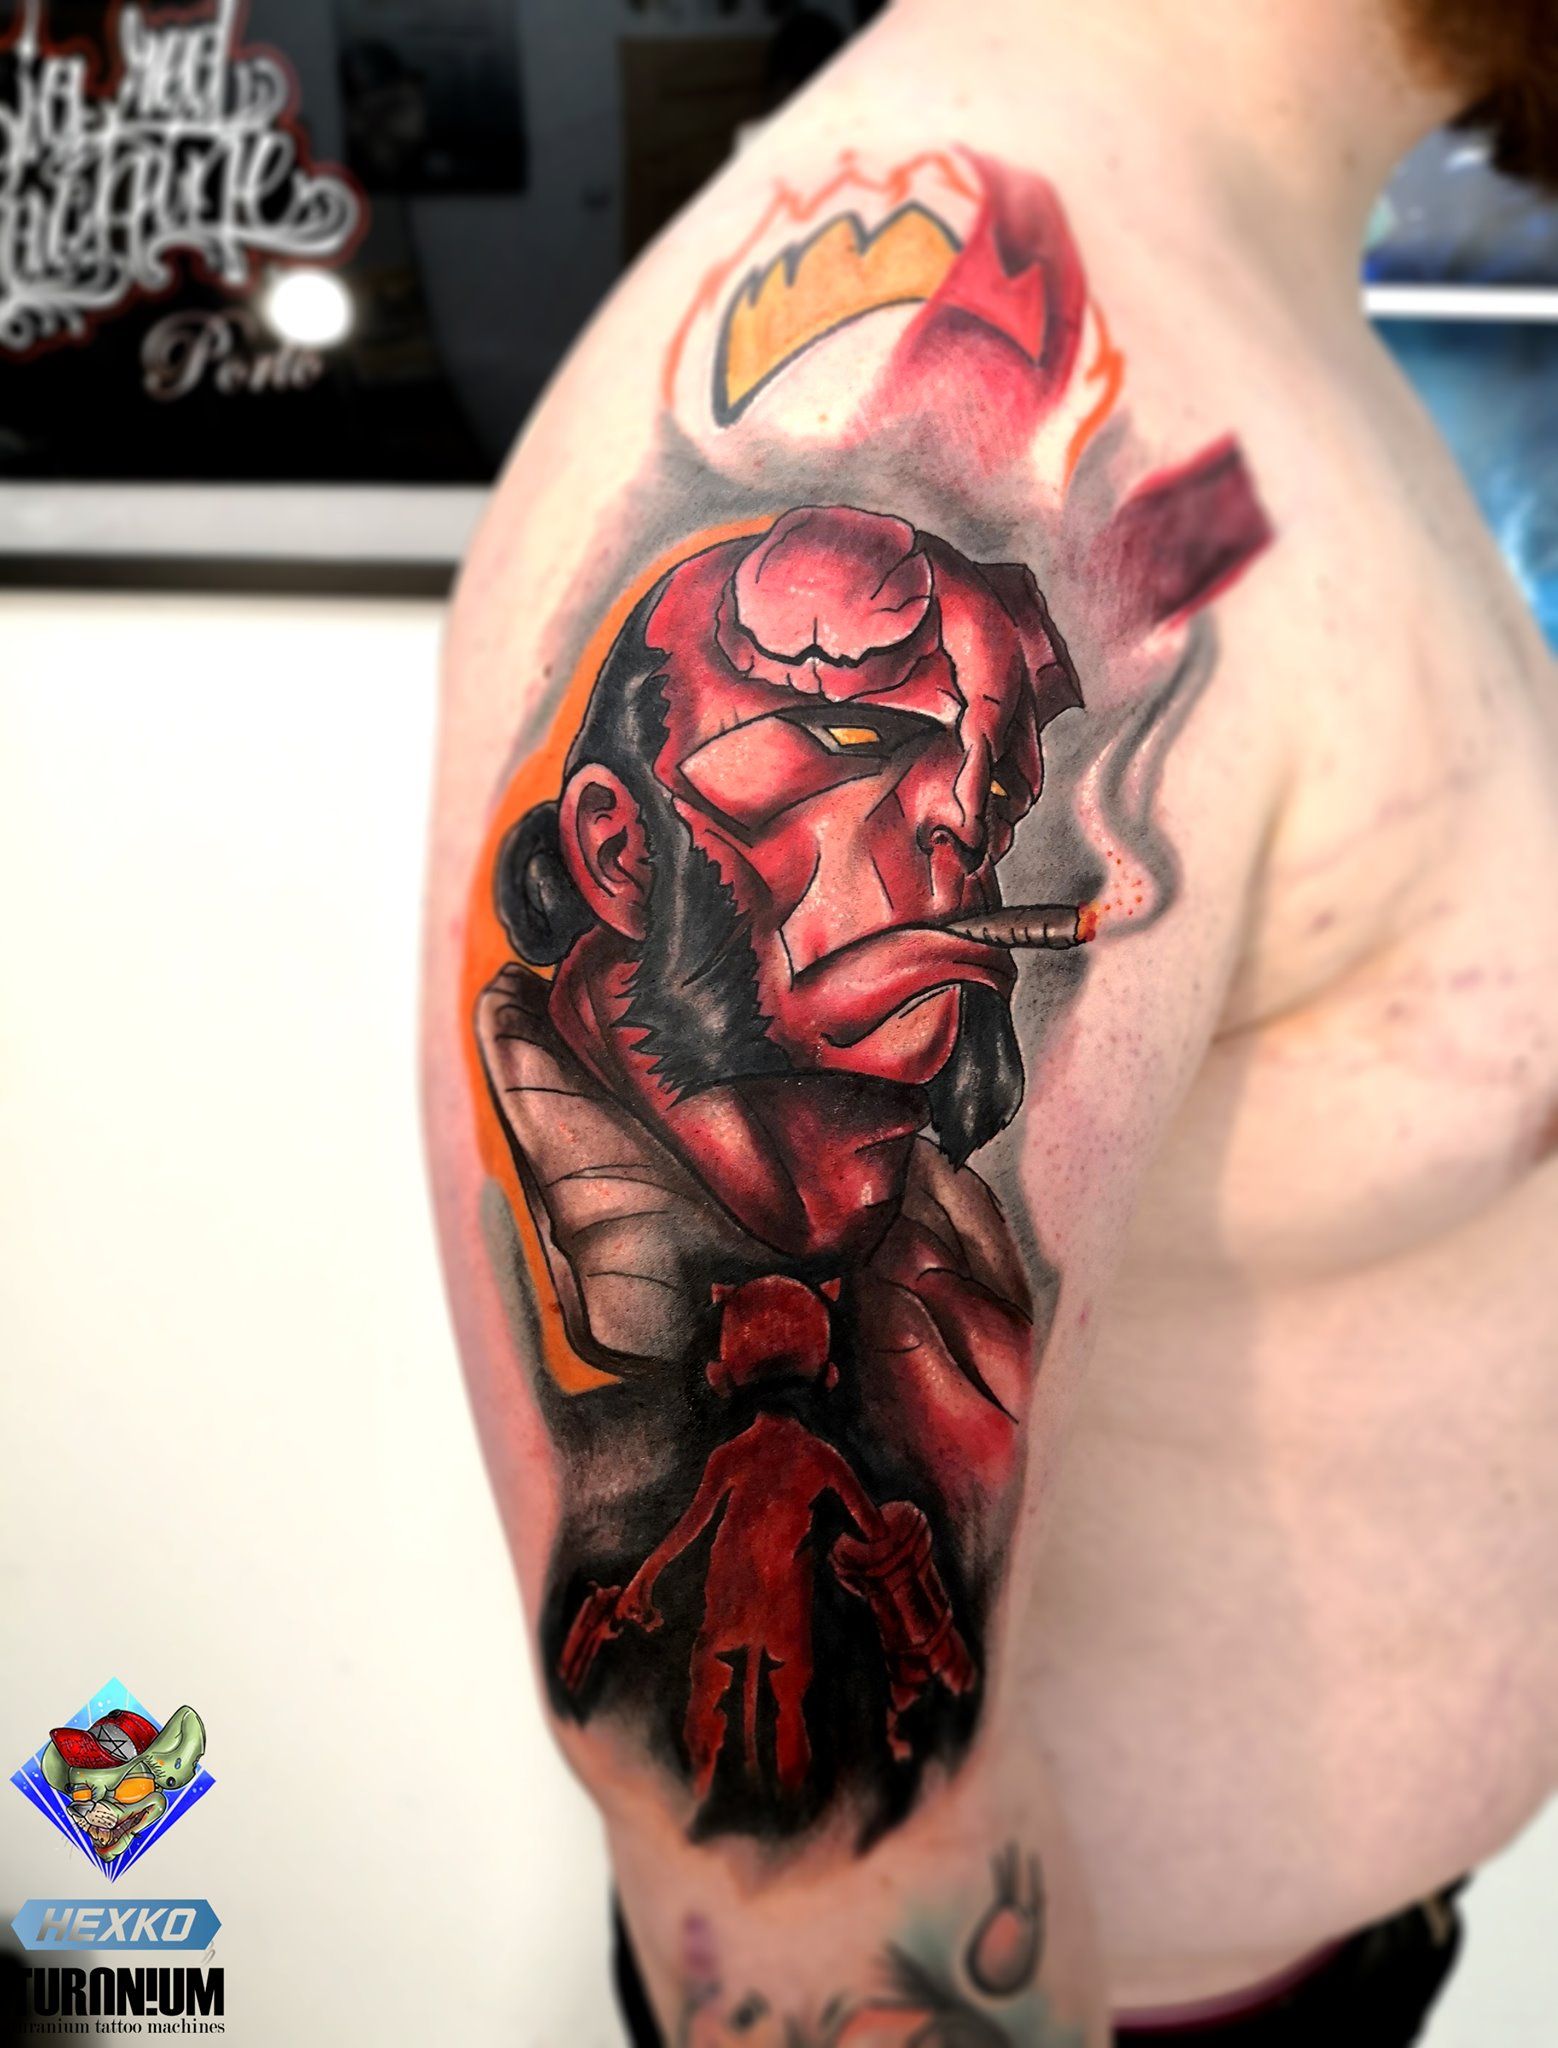 VN Tattoo Studio - Hellboy tattoo design by Vili. 2 sessions, 6000 for  session | Facebook